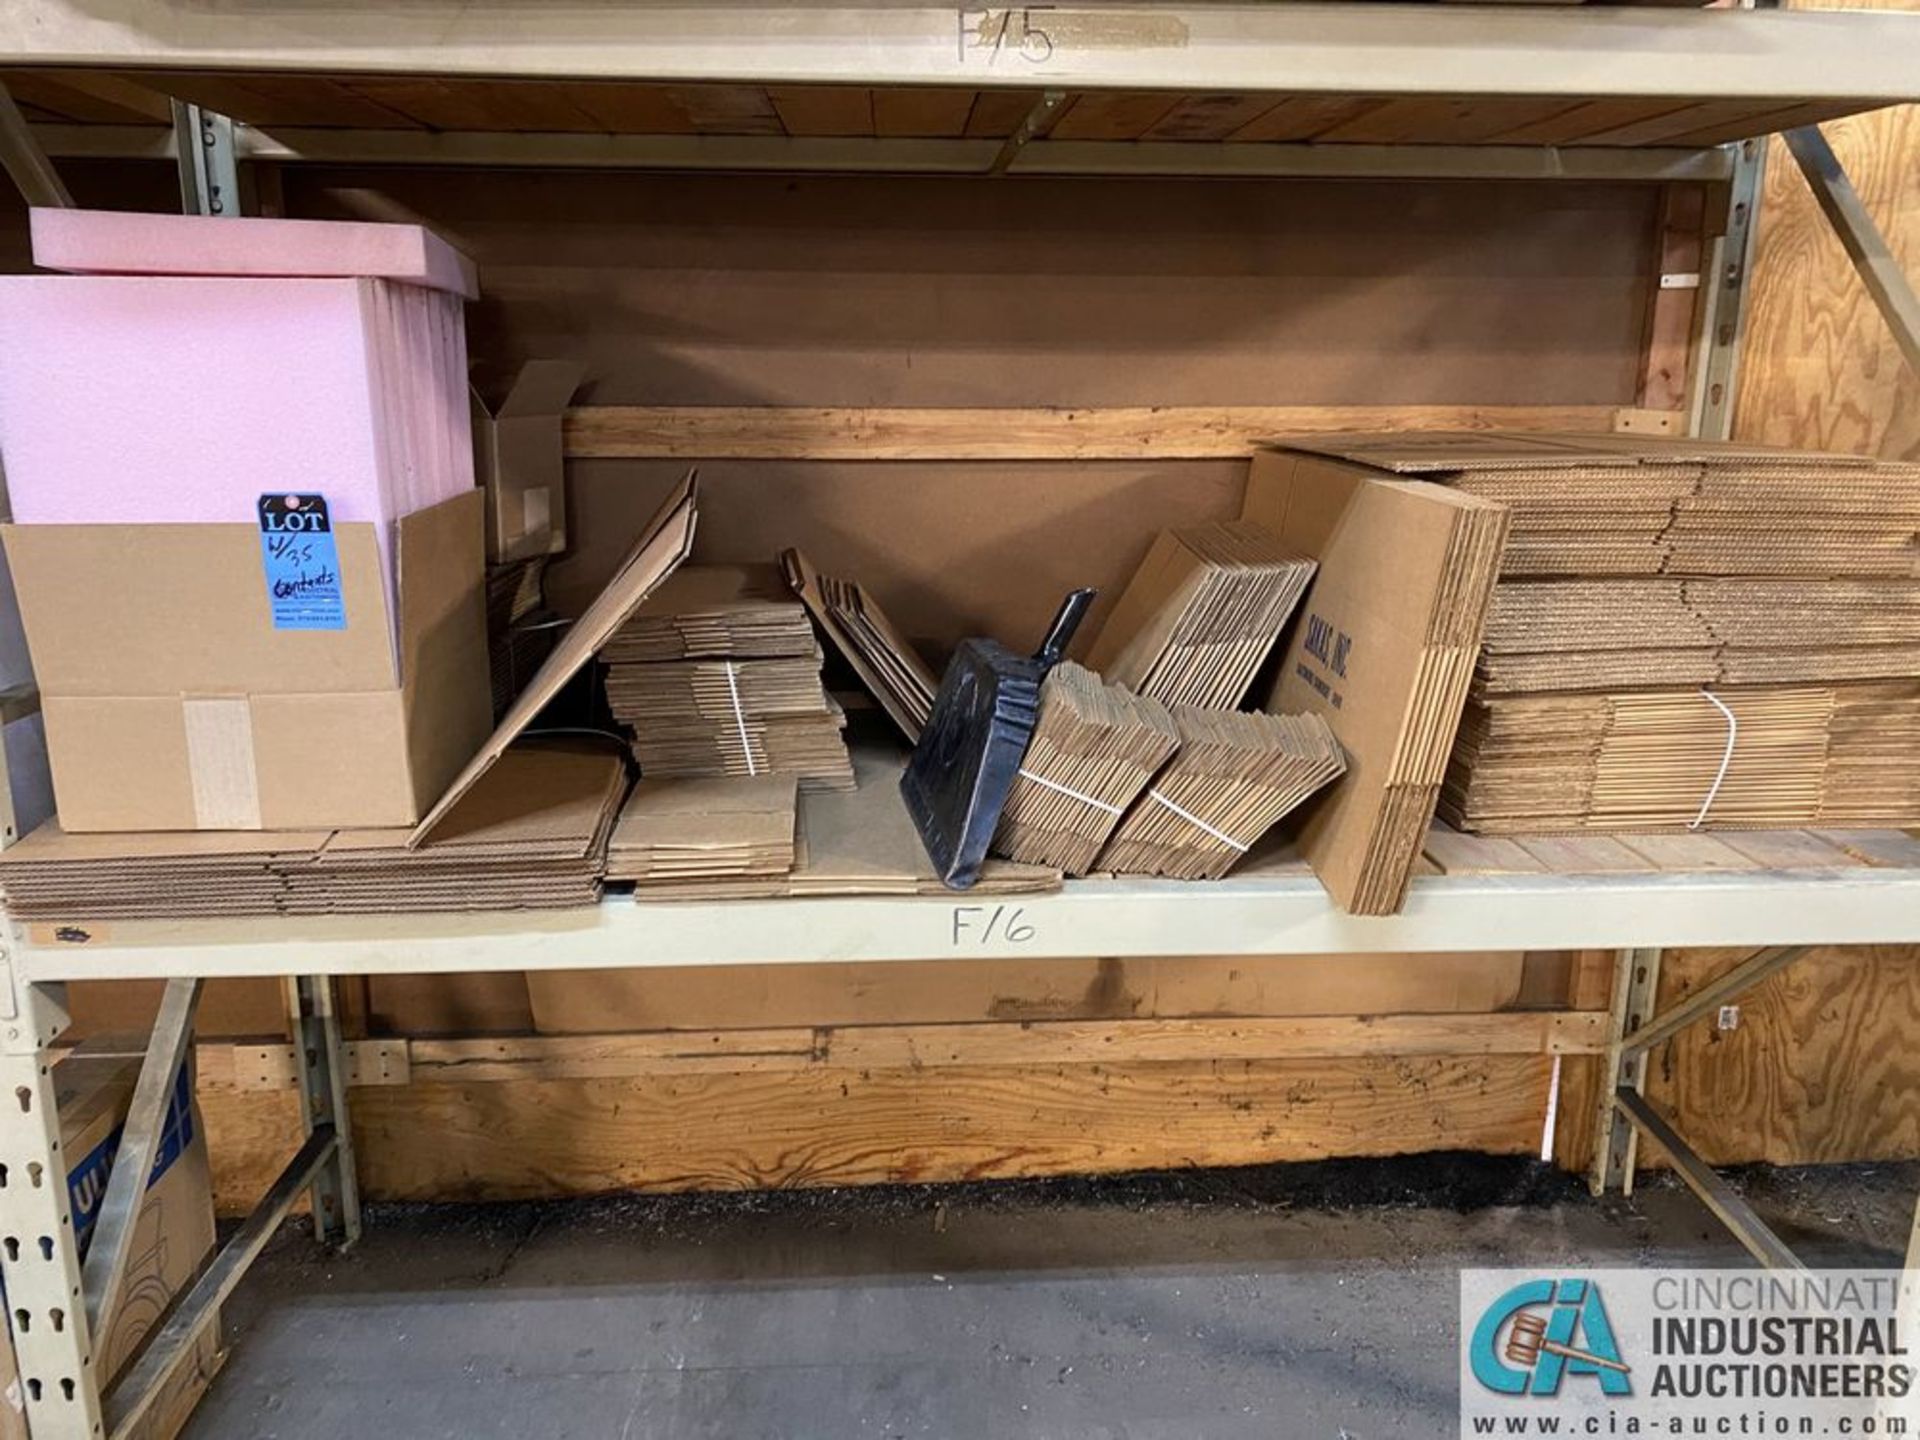 (LOT) CONTENTS OF 4-SECTIONS PALLET RACK - ASSORTED CORRUGATED BOXES AND OTHER SHIPPING SUPPLIES - Image 4 of 6